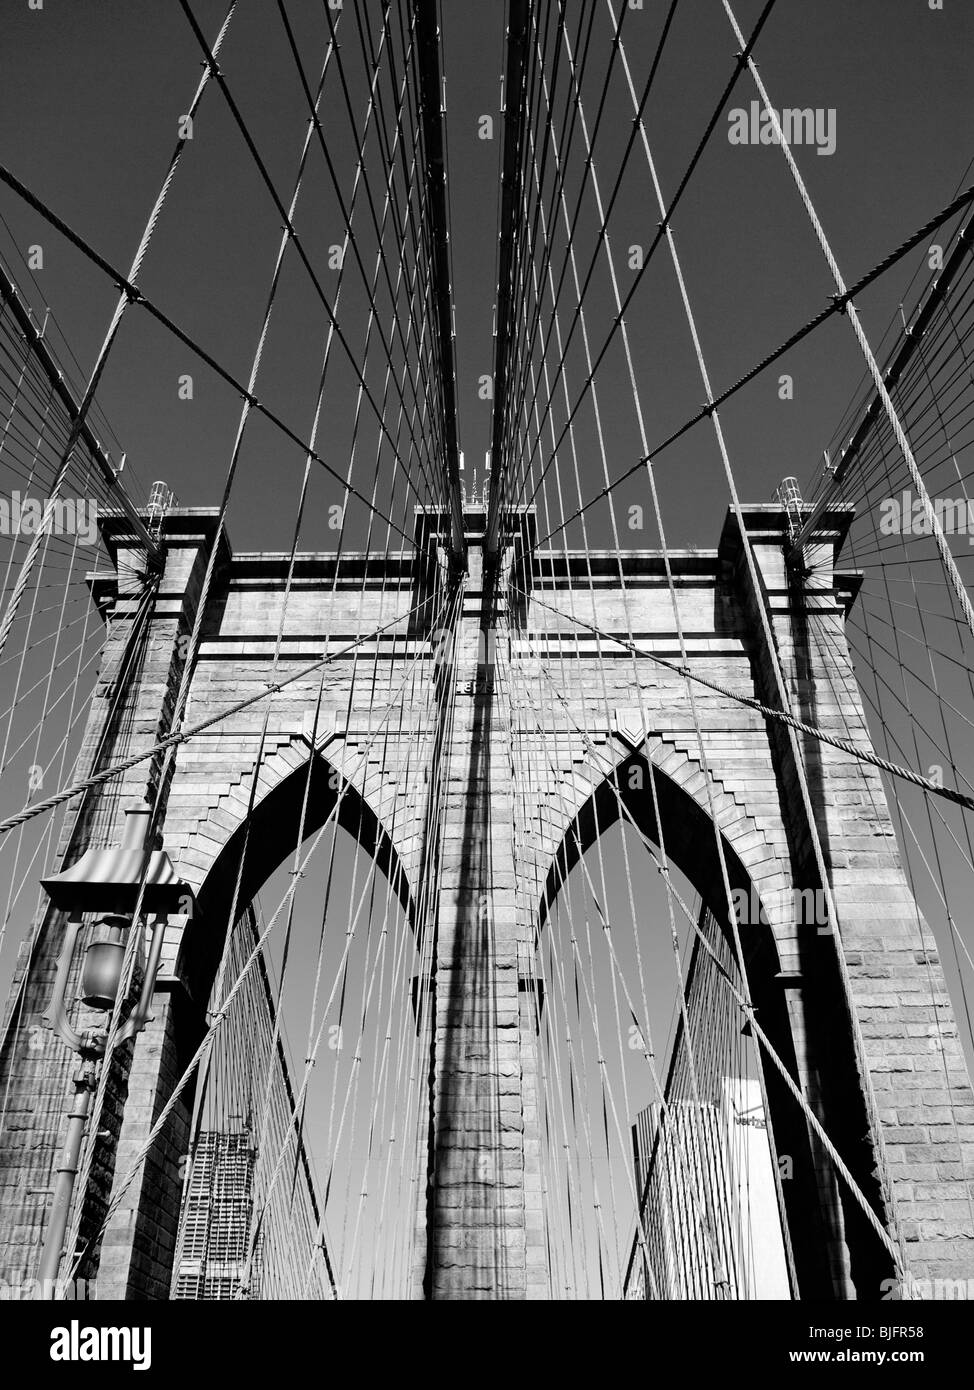 Black and White Study of Brooklyn Bridge Arches and Cables - New York - September 2009 Stock Photo